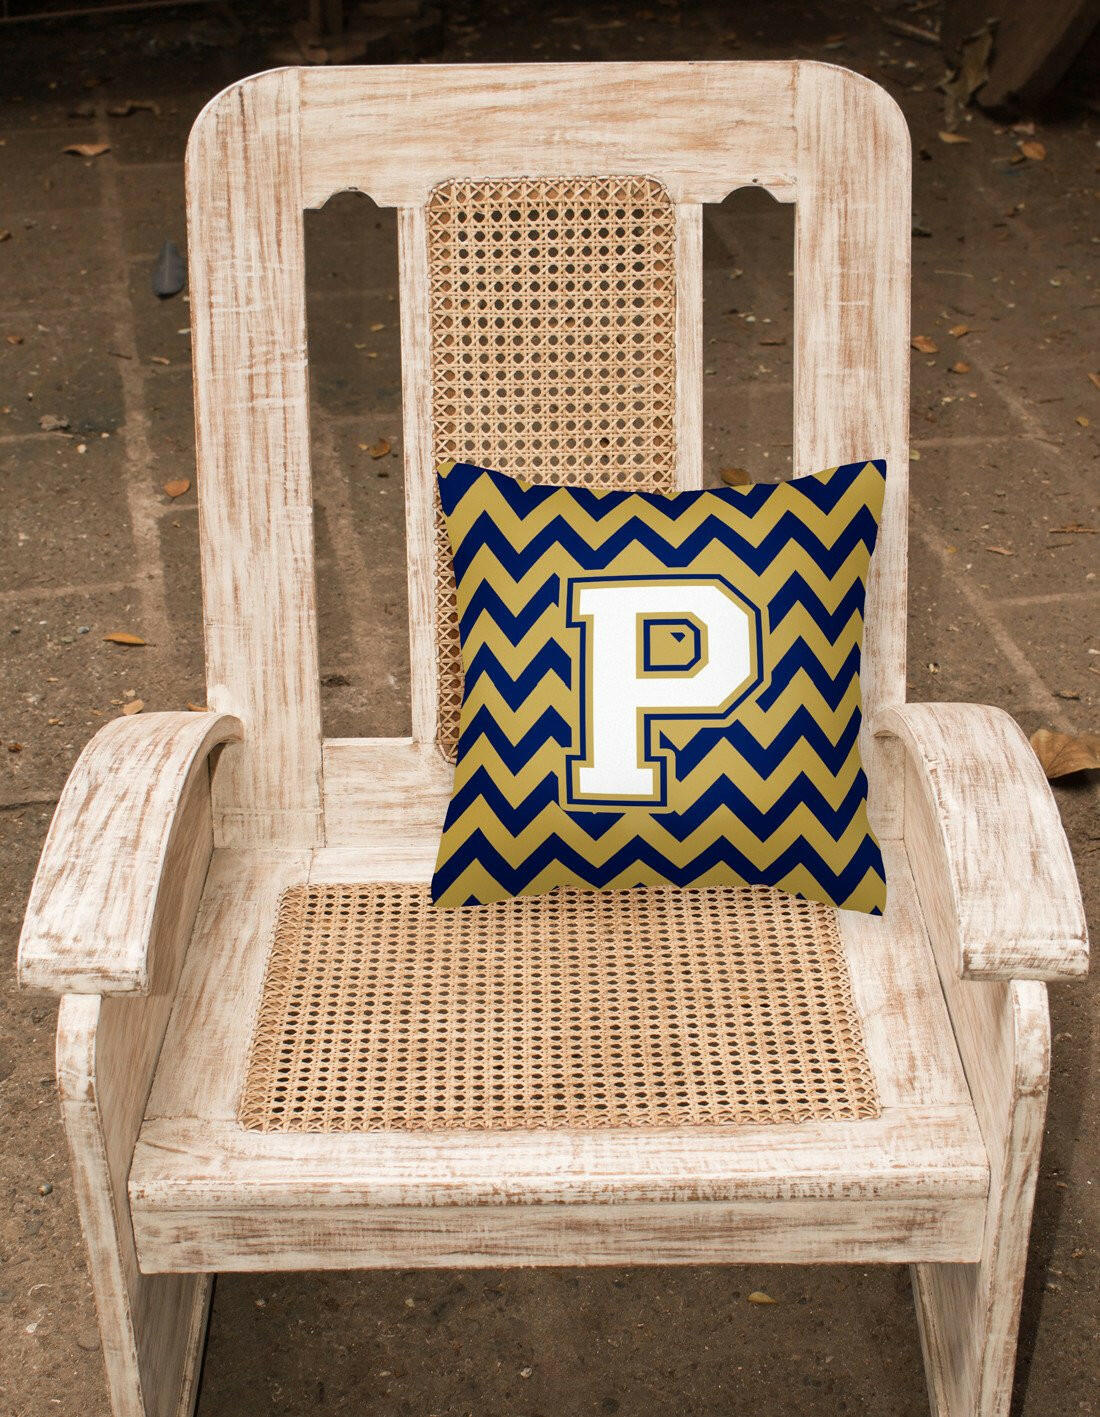 Letter P Chevron Navy Blue and Gold Fabric Decorative Pillow CJ1057-PPW1414 by Caroline's Treasures